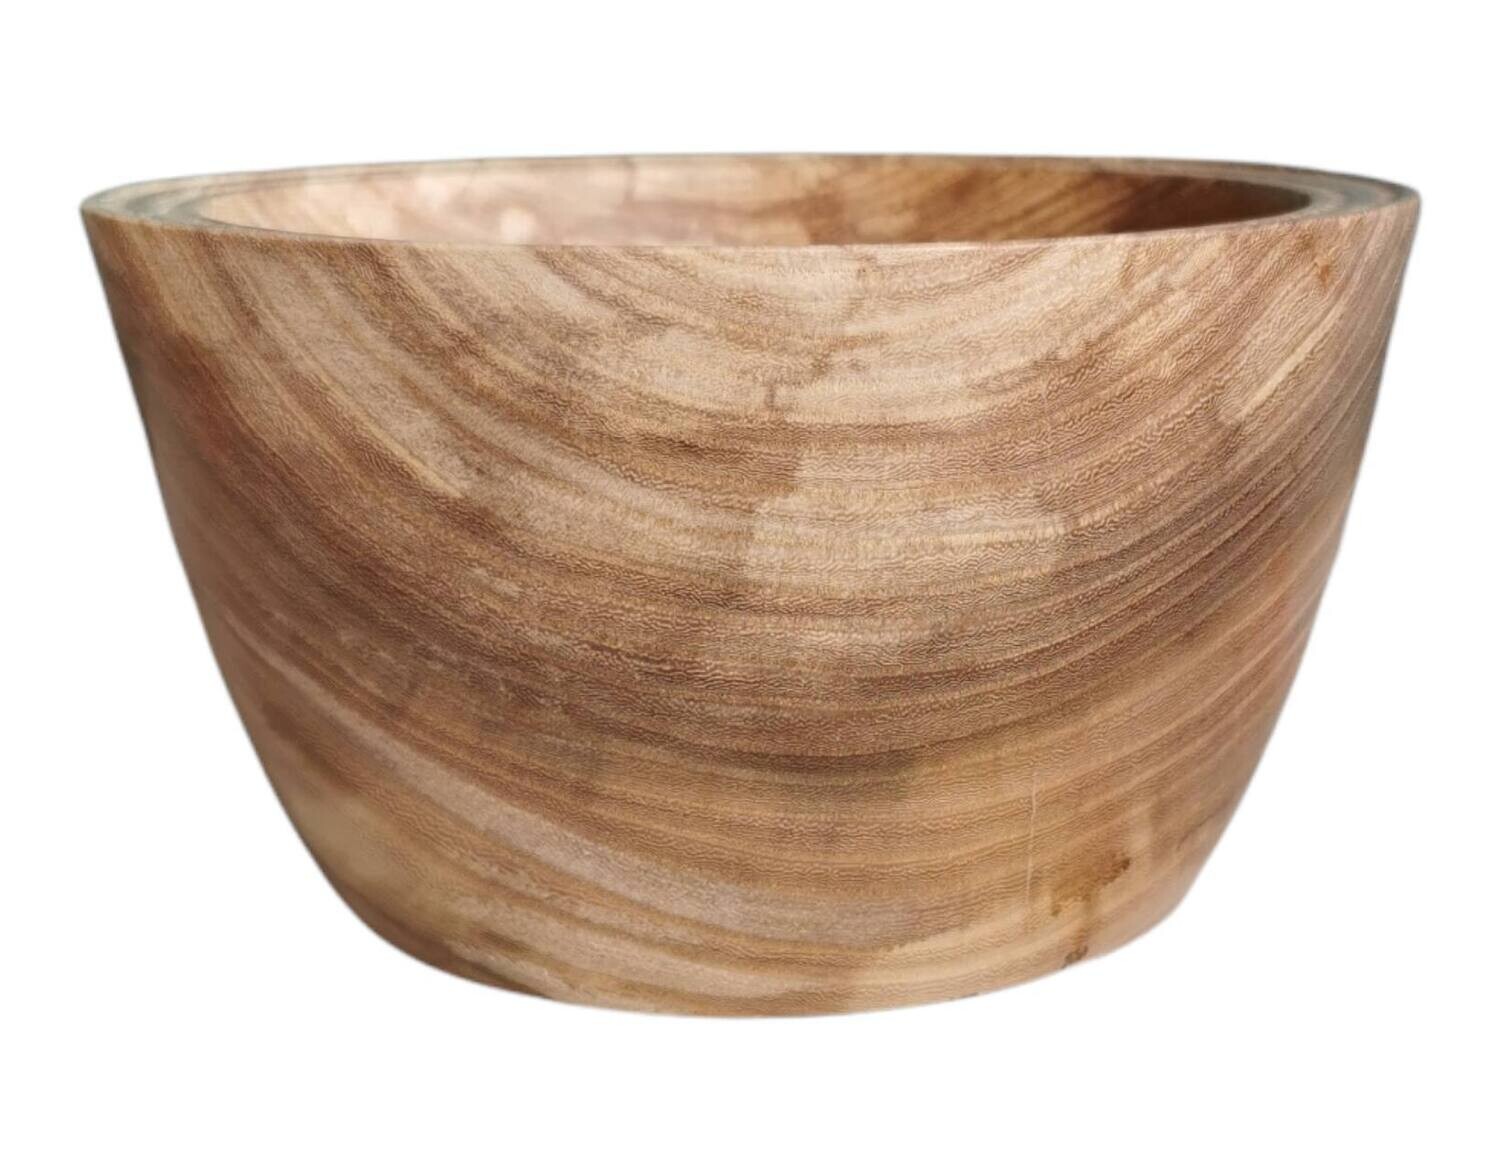 Irish Spalted Elm Mid Sized Wooden Bowl